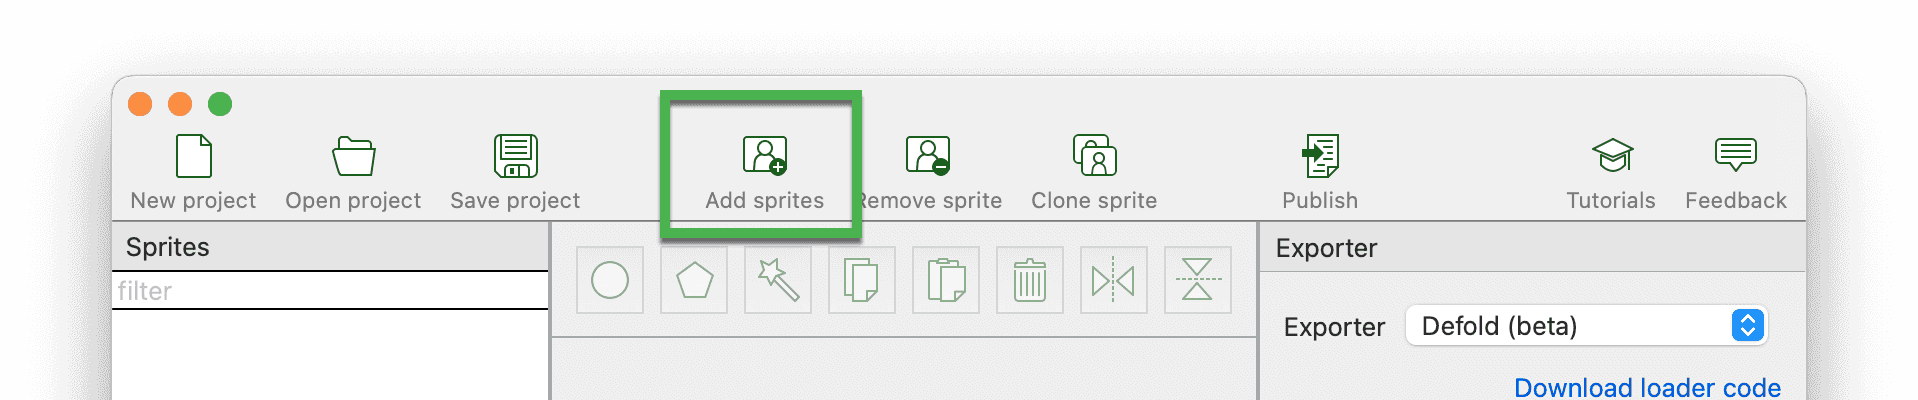 PhysicsEditor: add sprites by clicking the toolbar button